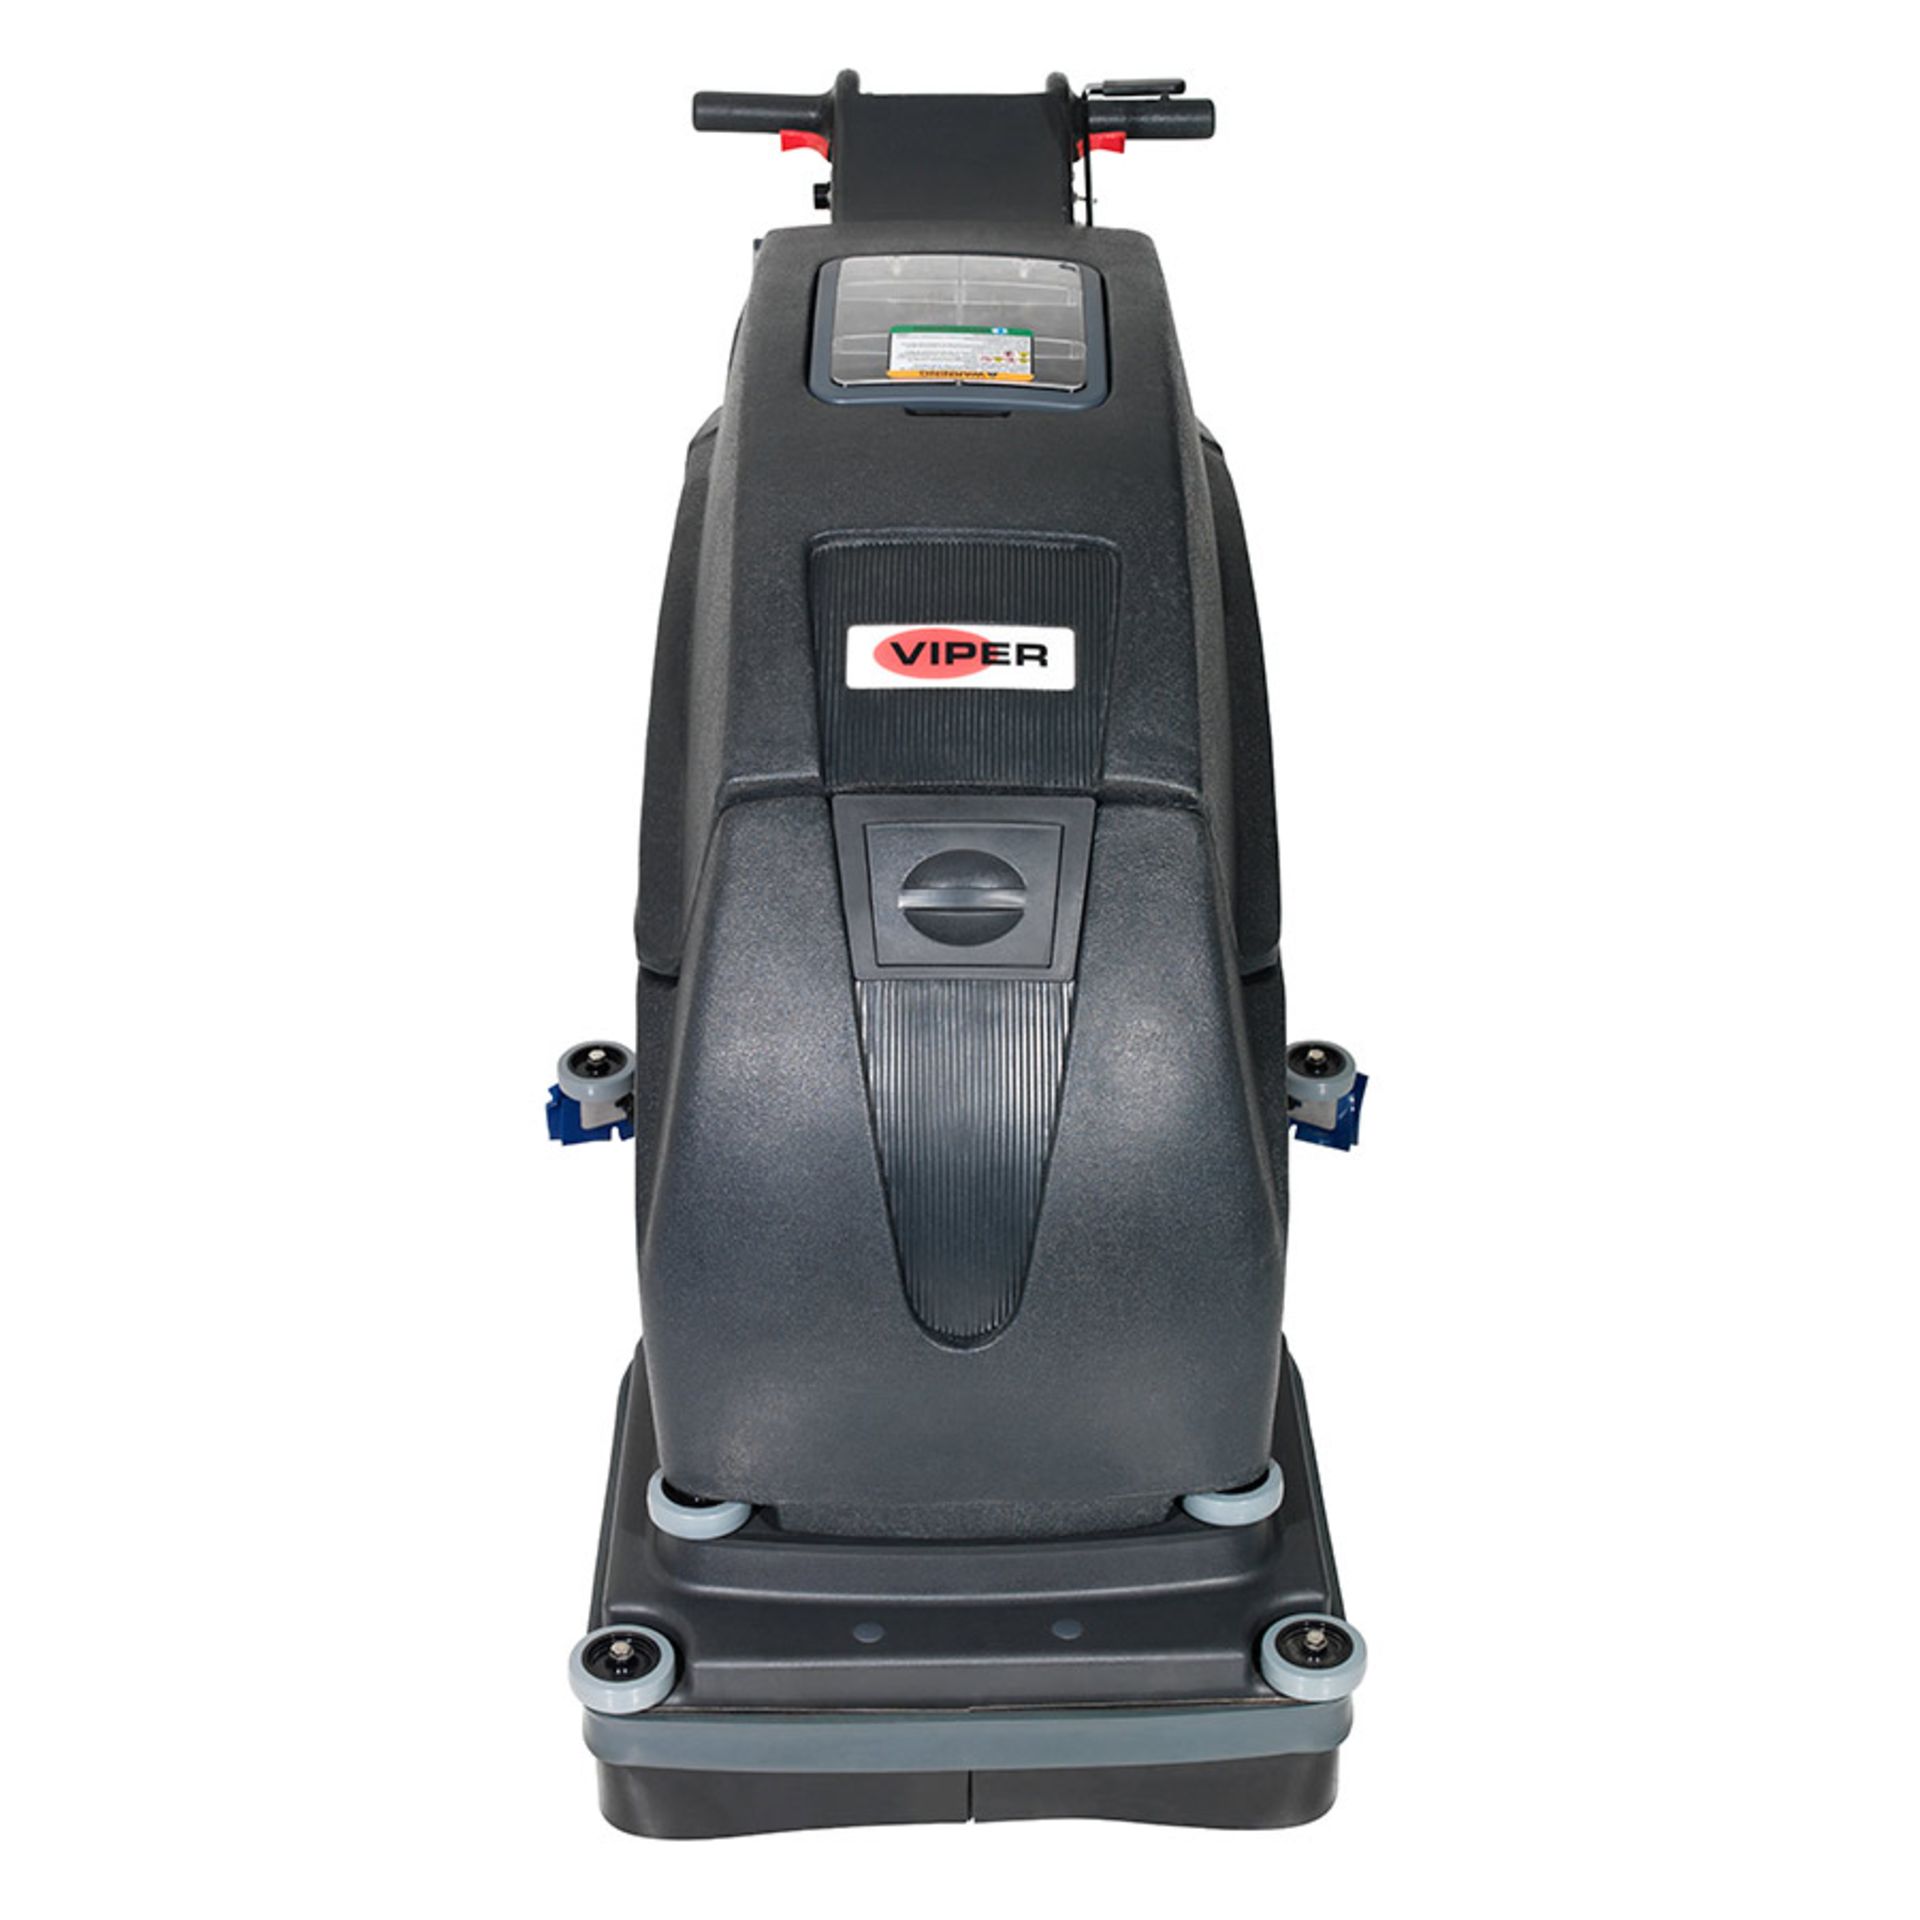 Viper Fang 20HD Walk-behind scrubber dryer. Transaxle drive system.  Light and easy to manoeuvre. - Bild 2 aus 4